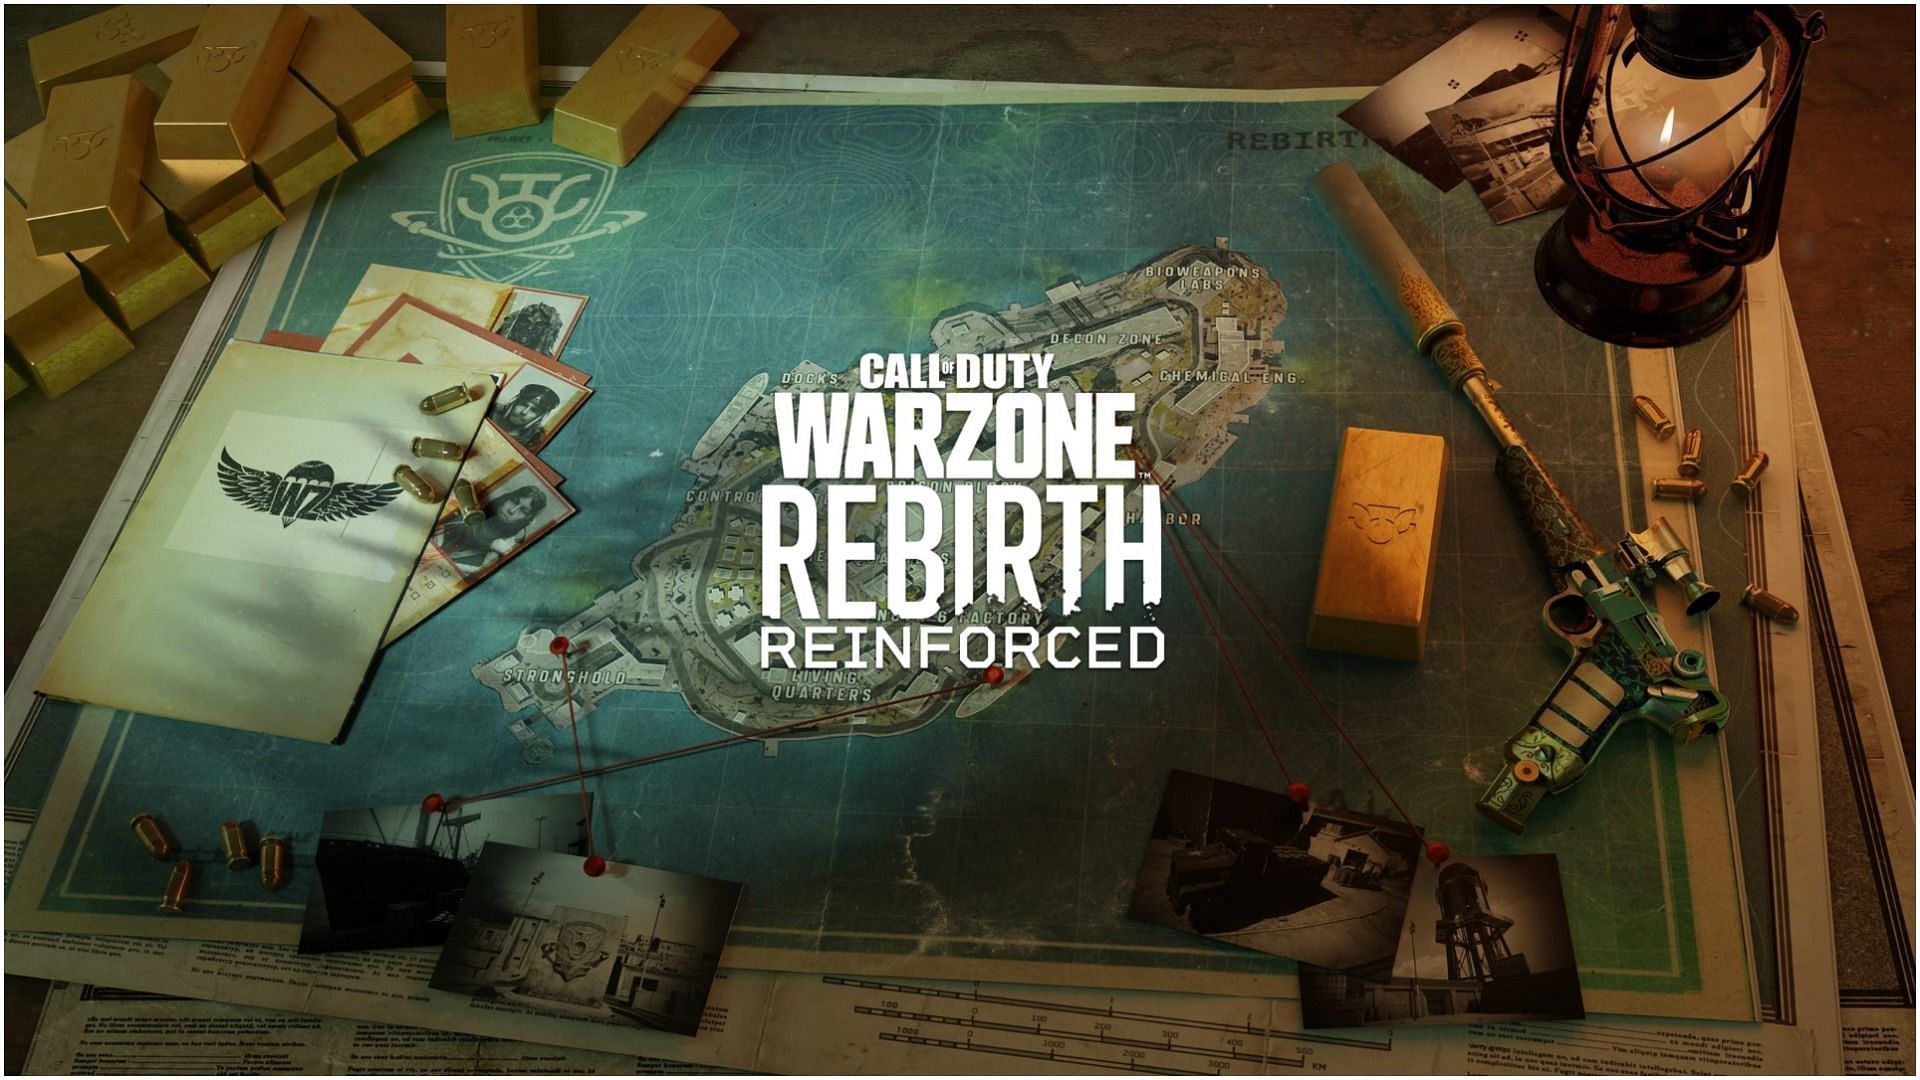 There are three secret access codes available on the Rebirth Island in Warzone (Image via Activision)